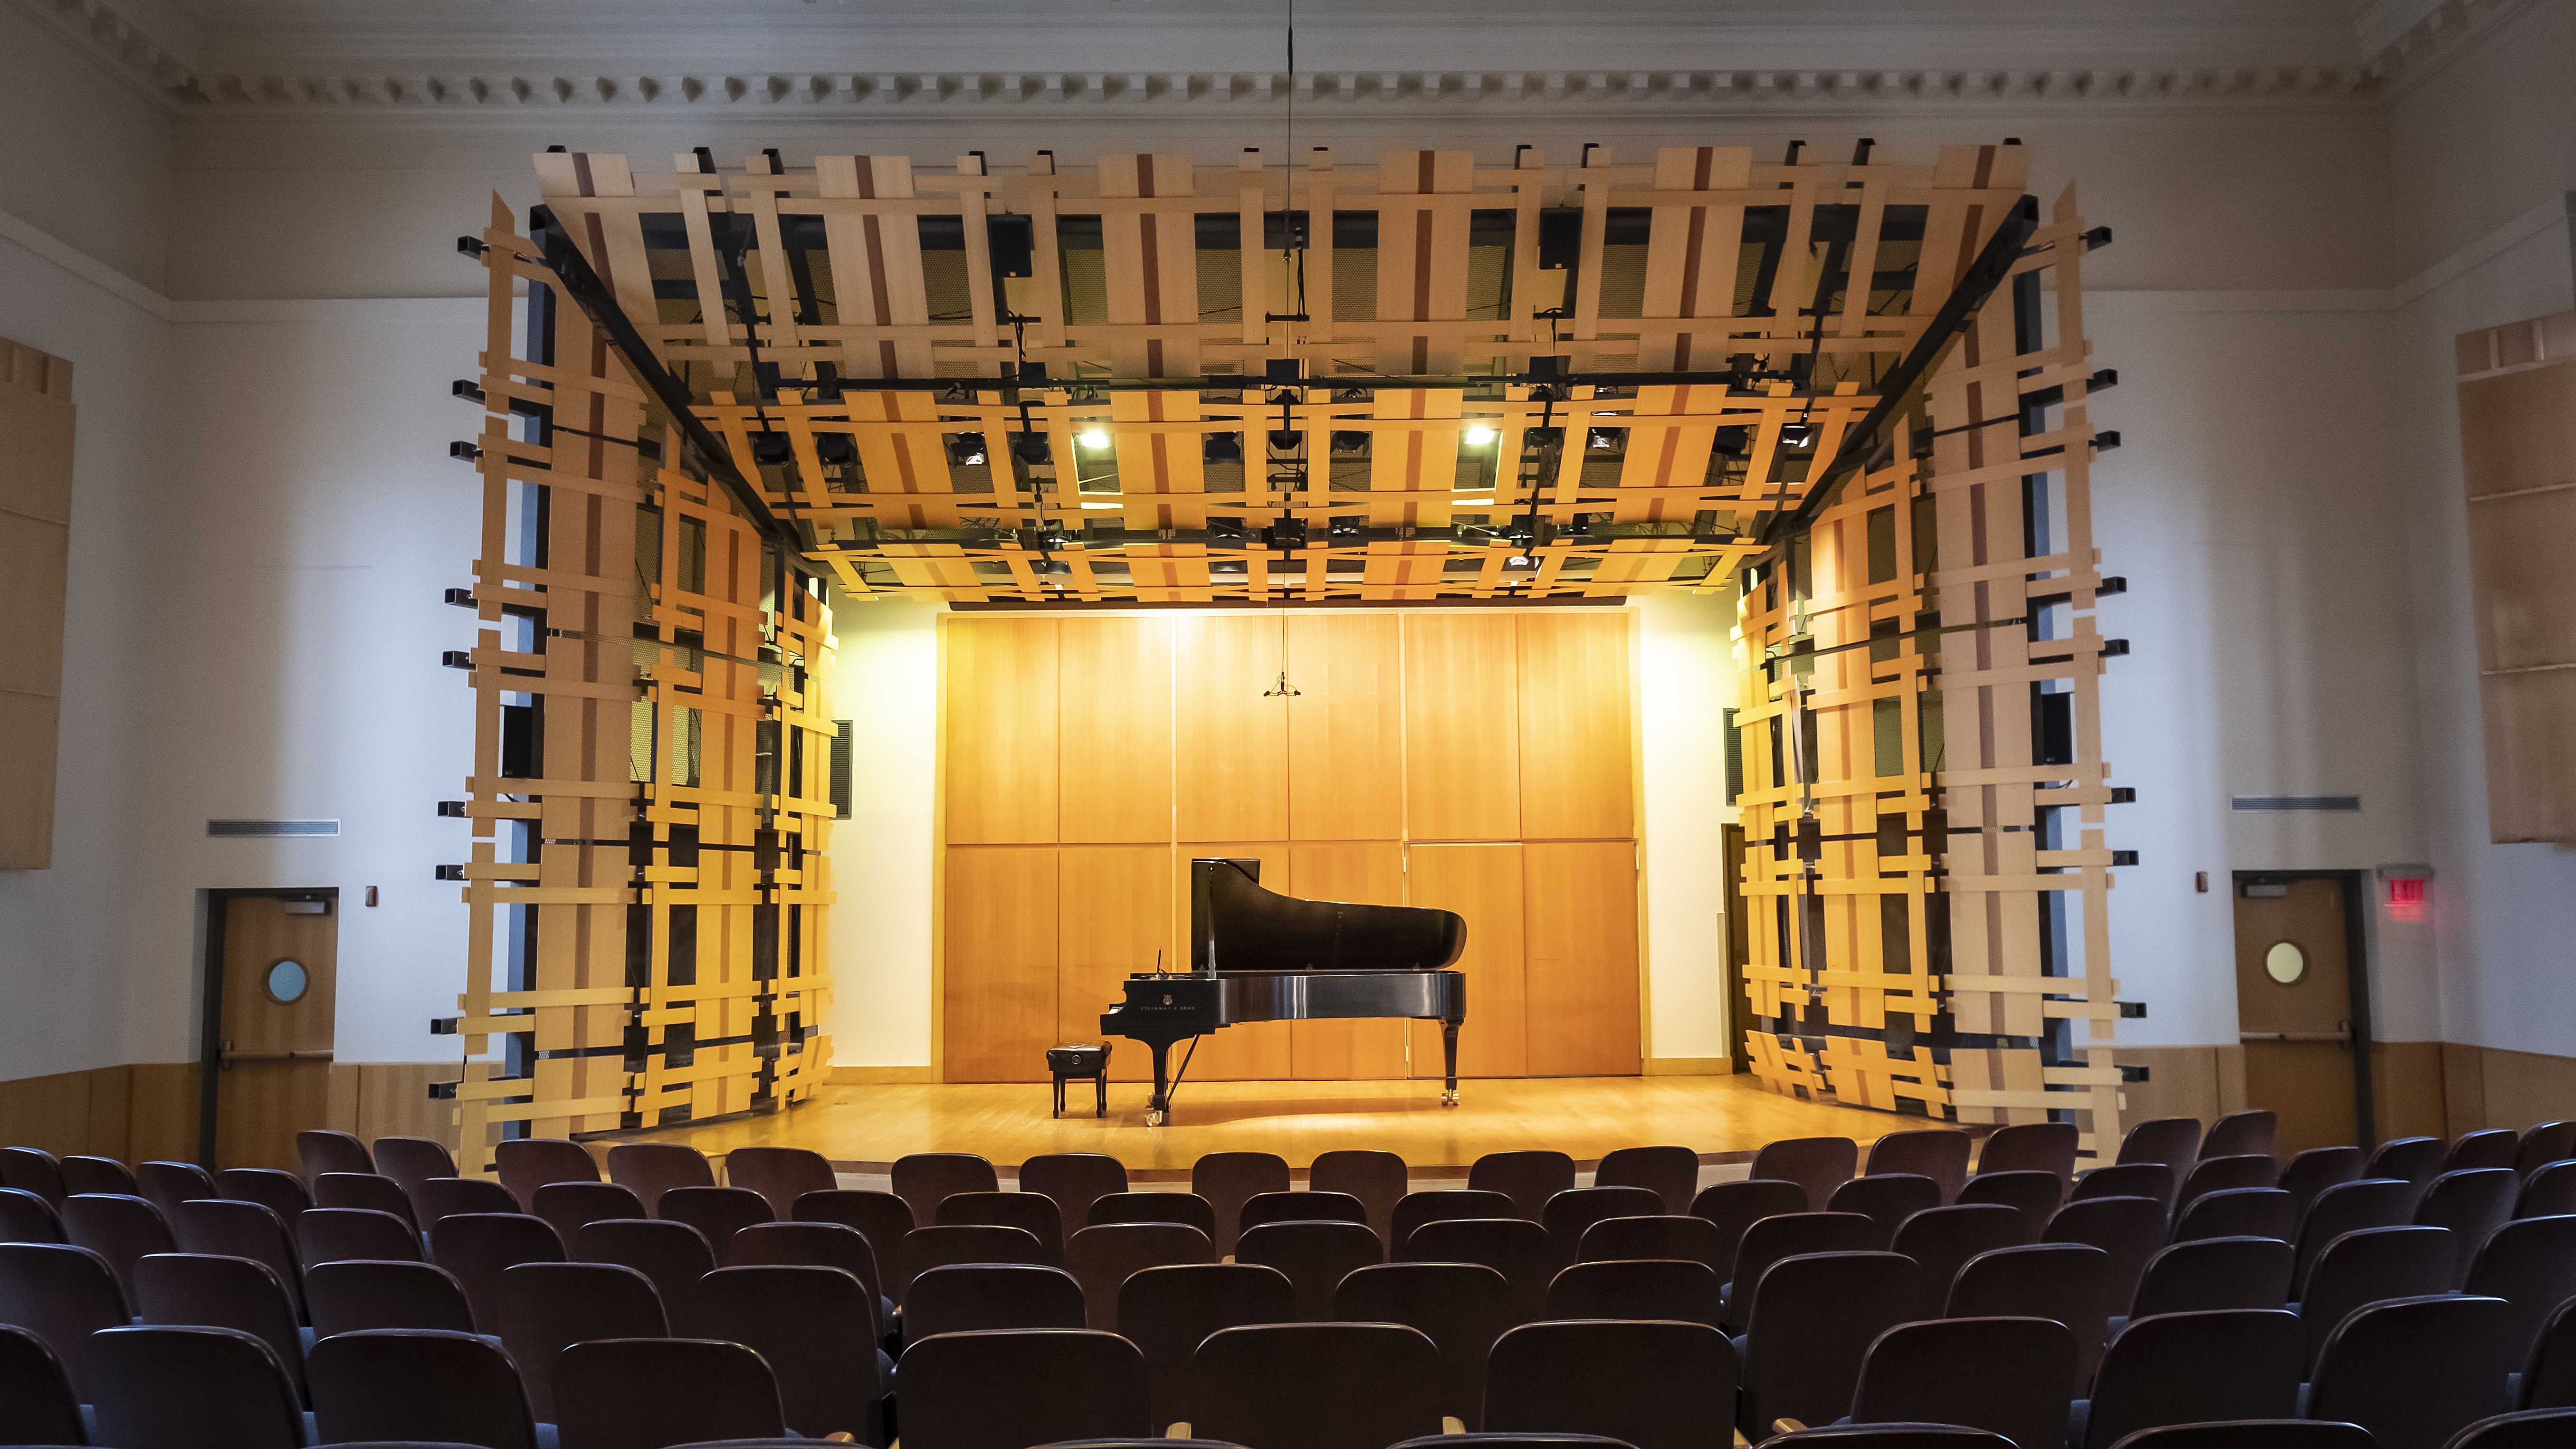 Auditorium seating and stage with grand piano, from the back of the hall